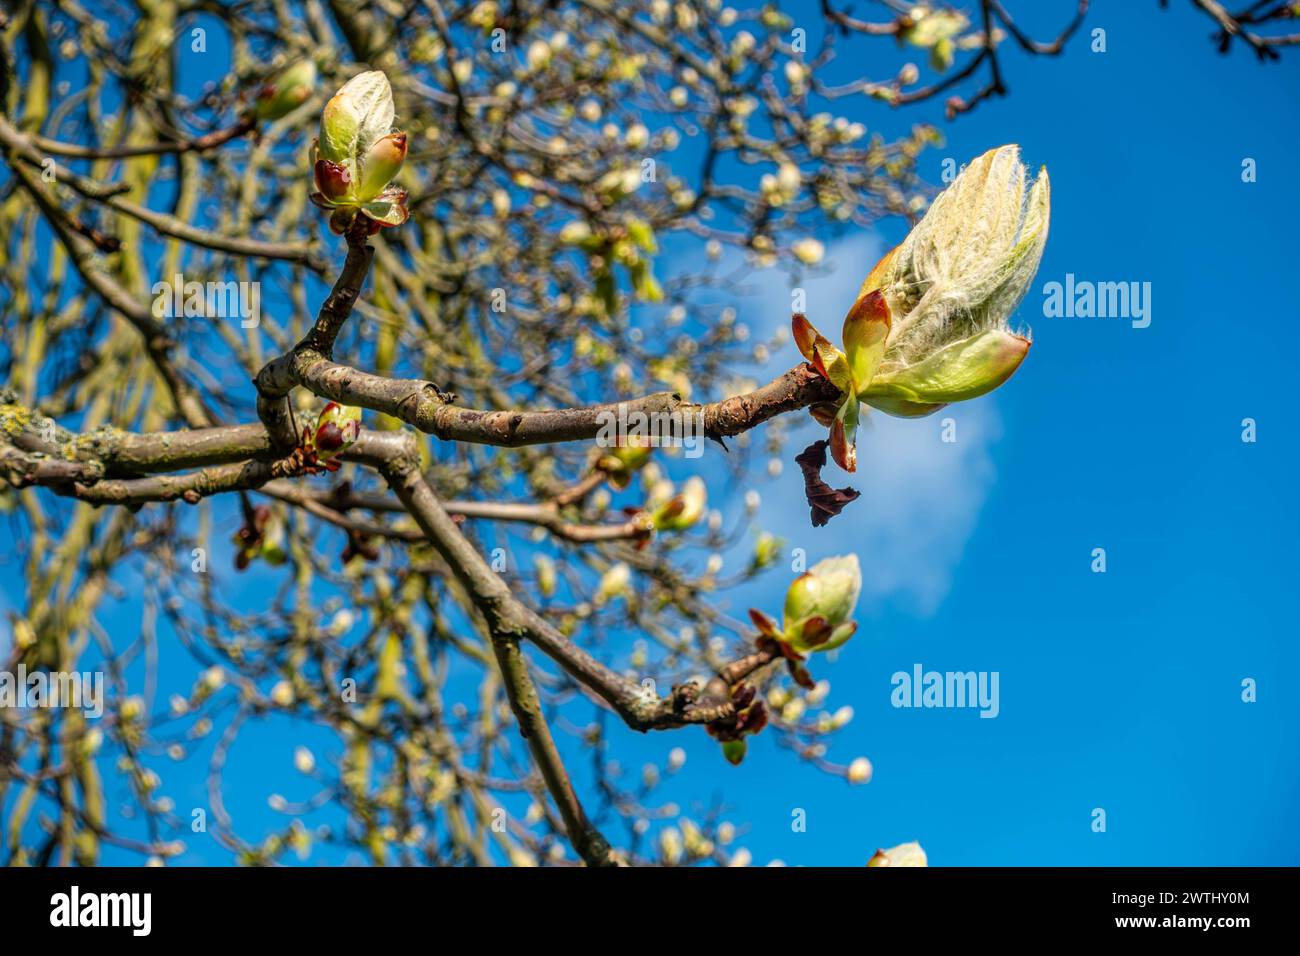 Close up view of leaf buds on a tree starting to burst open in early spring seen against a blue sky. Stock Photo